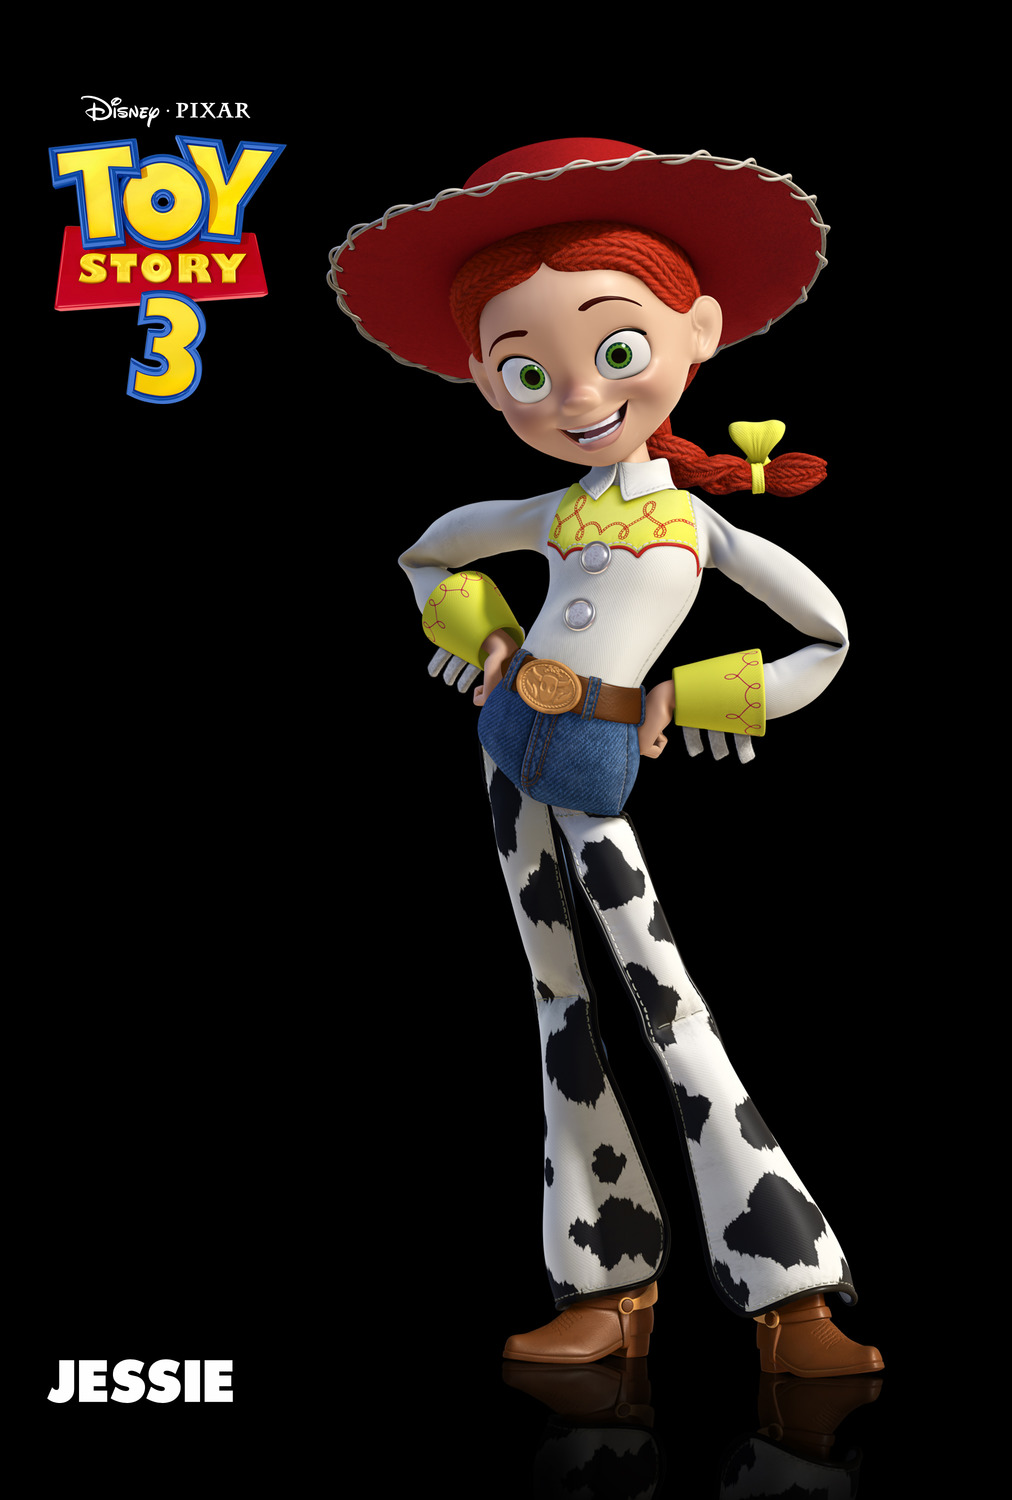 Extra Large Movie Poster Image for Toy Story 3 (#37 of 37)